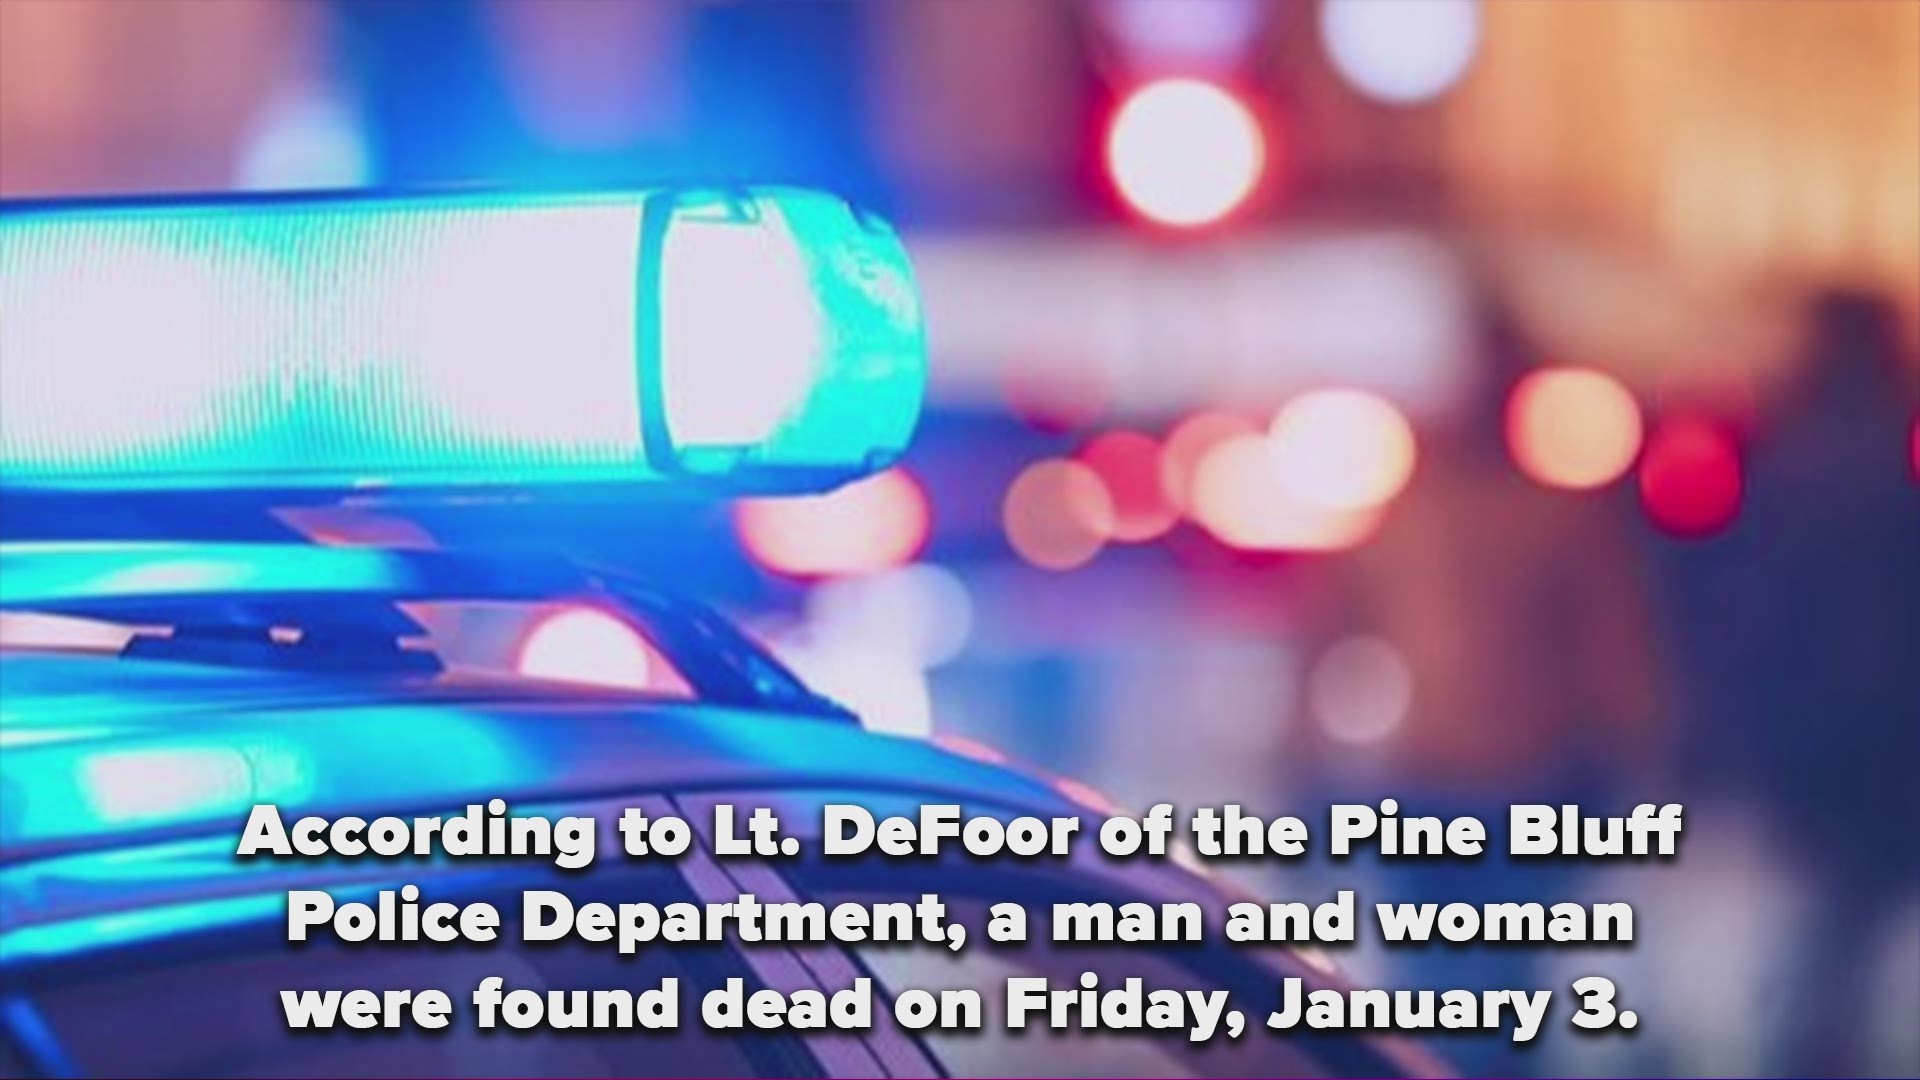 According to Lt. DeFoor of the Pine Bluff Police Department, a man and woman were found dead on Friday, January 3.